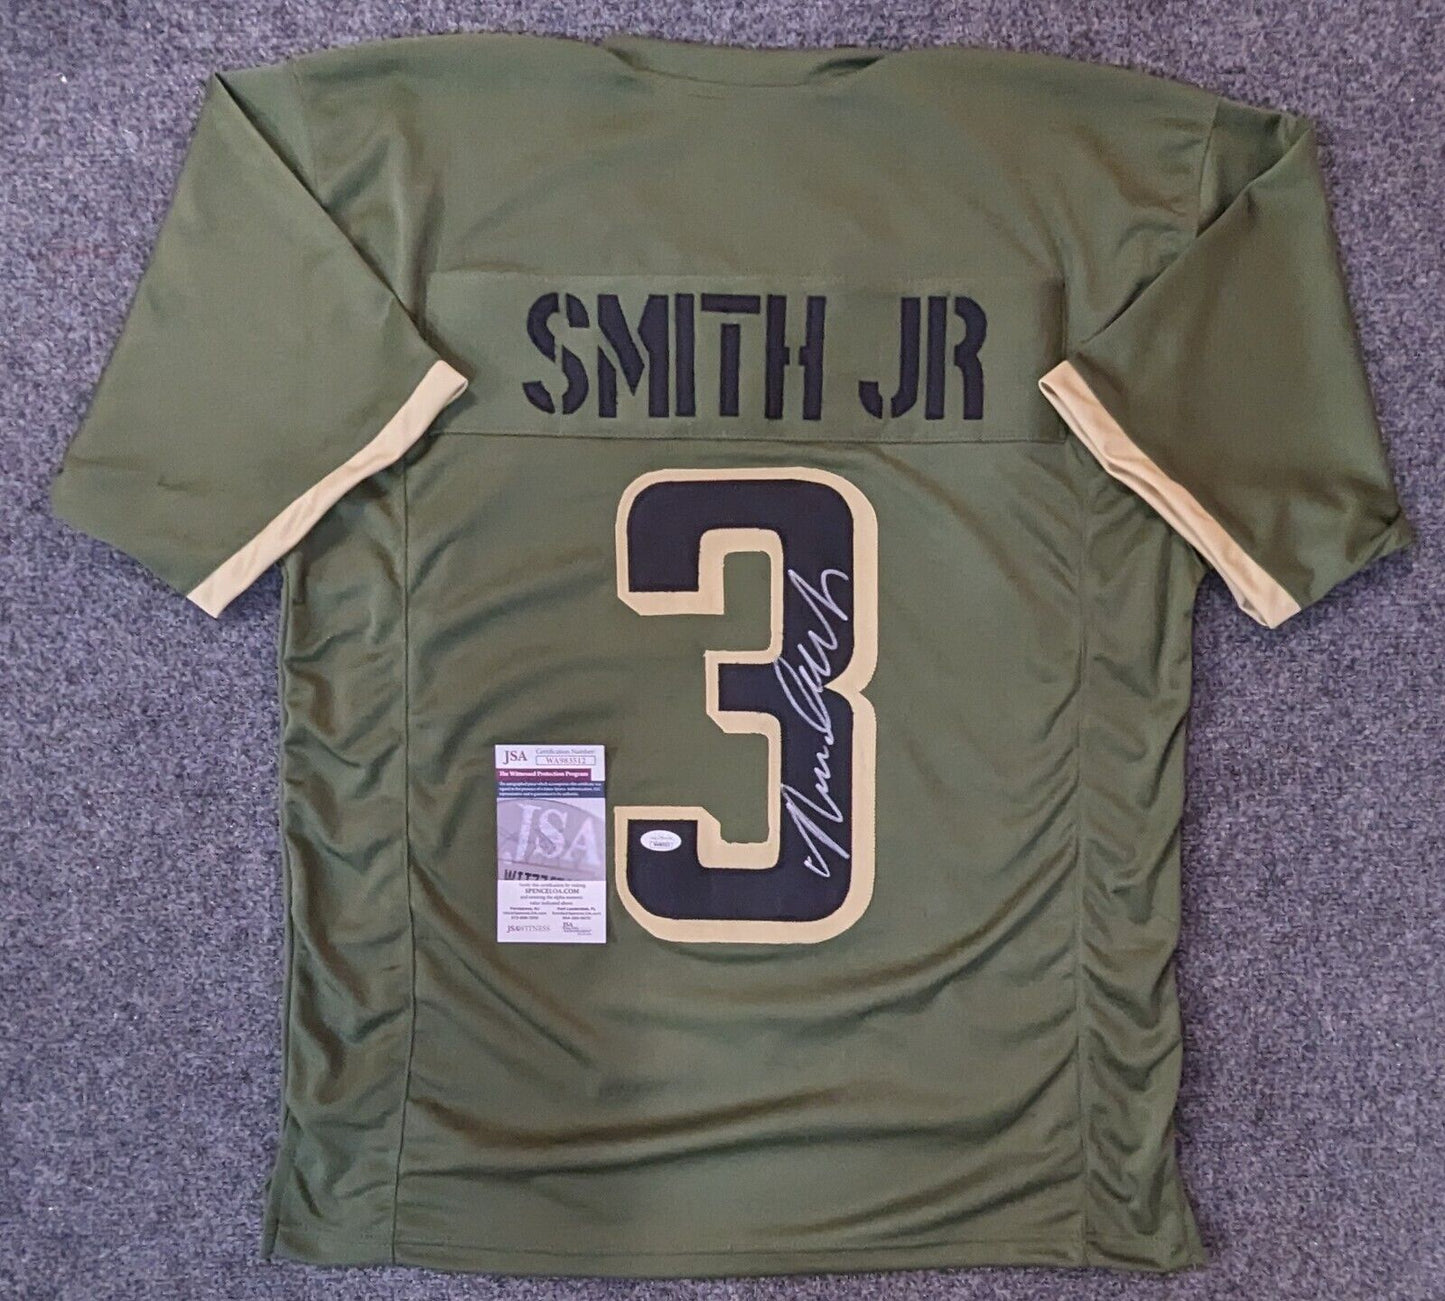 salute to service eagles jersey